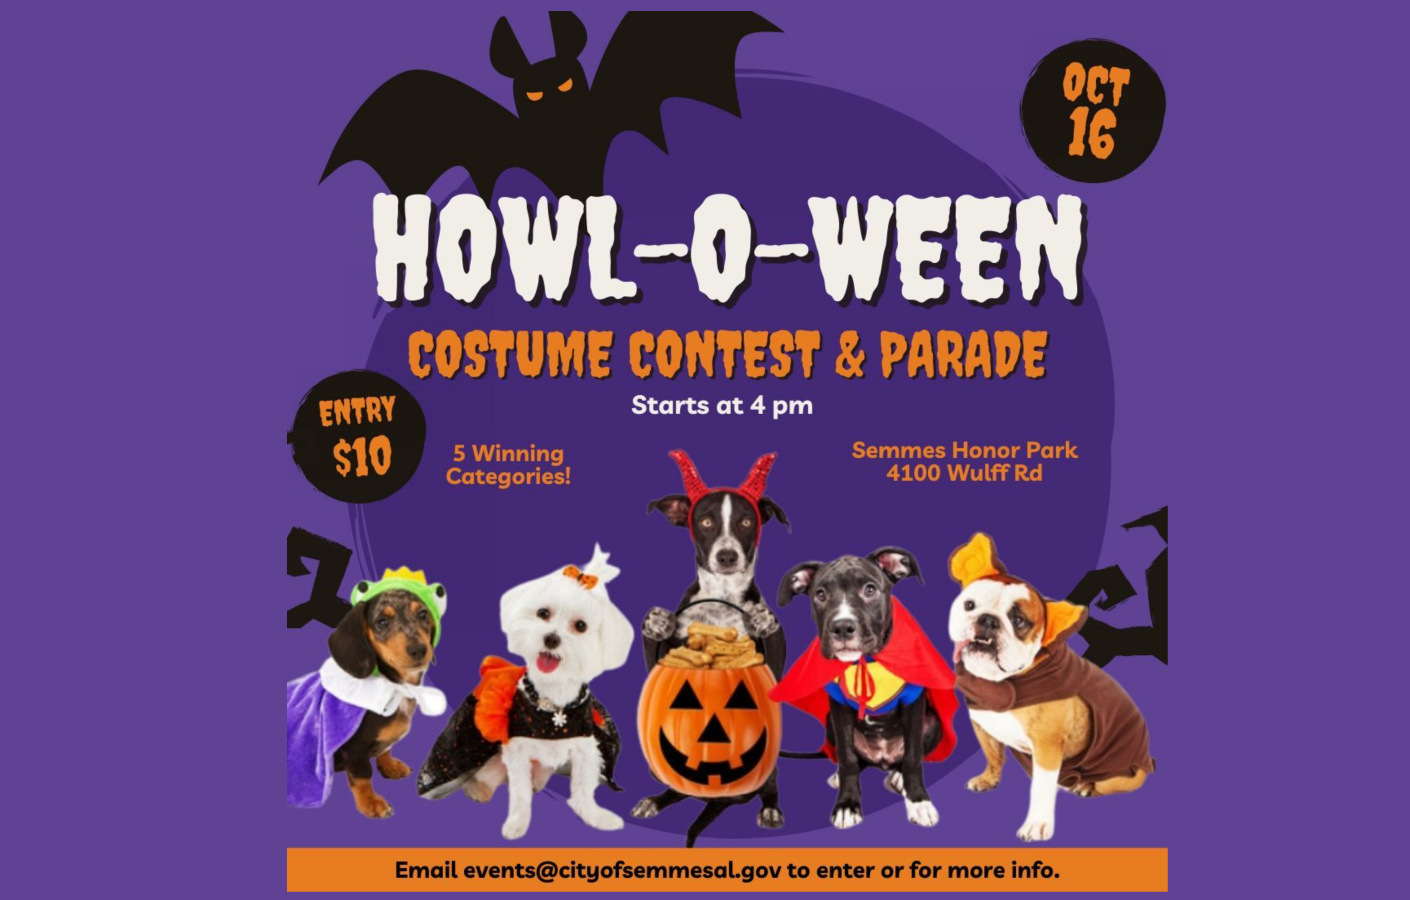 5 Fun DIY Howl-O-Ween Costume Ideas For Your Dog